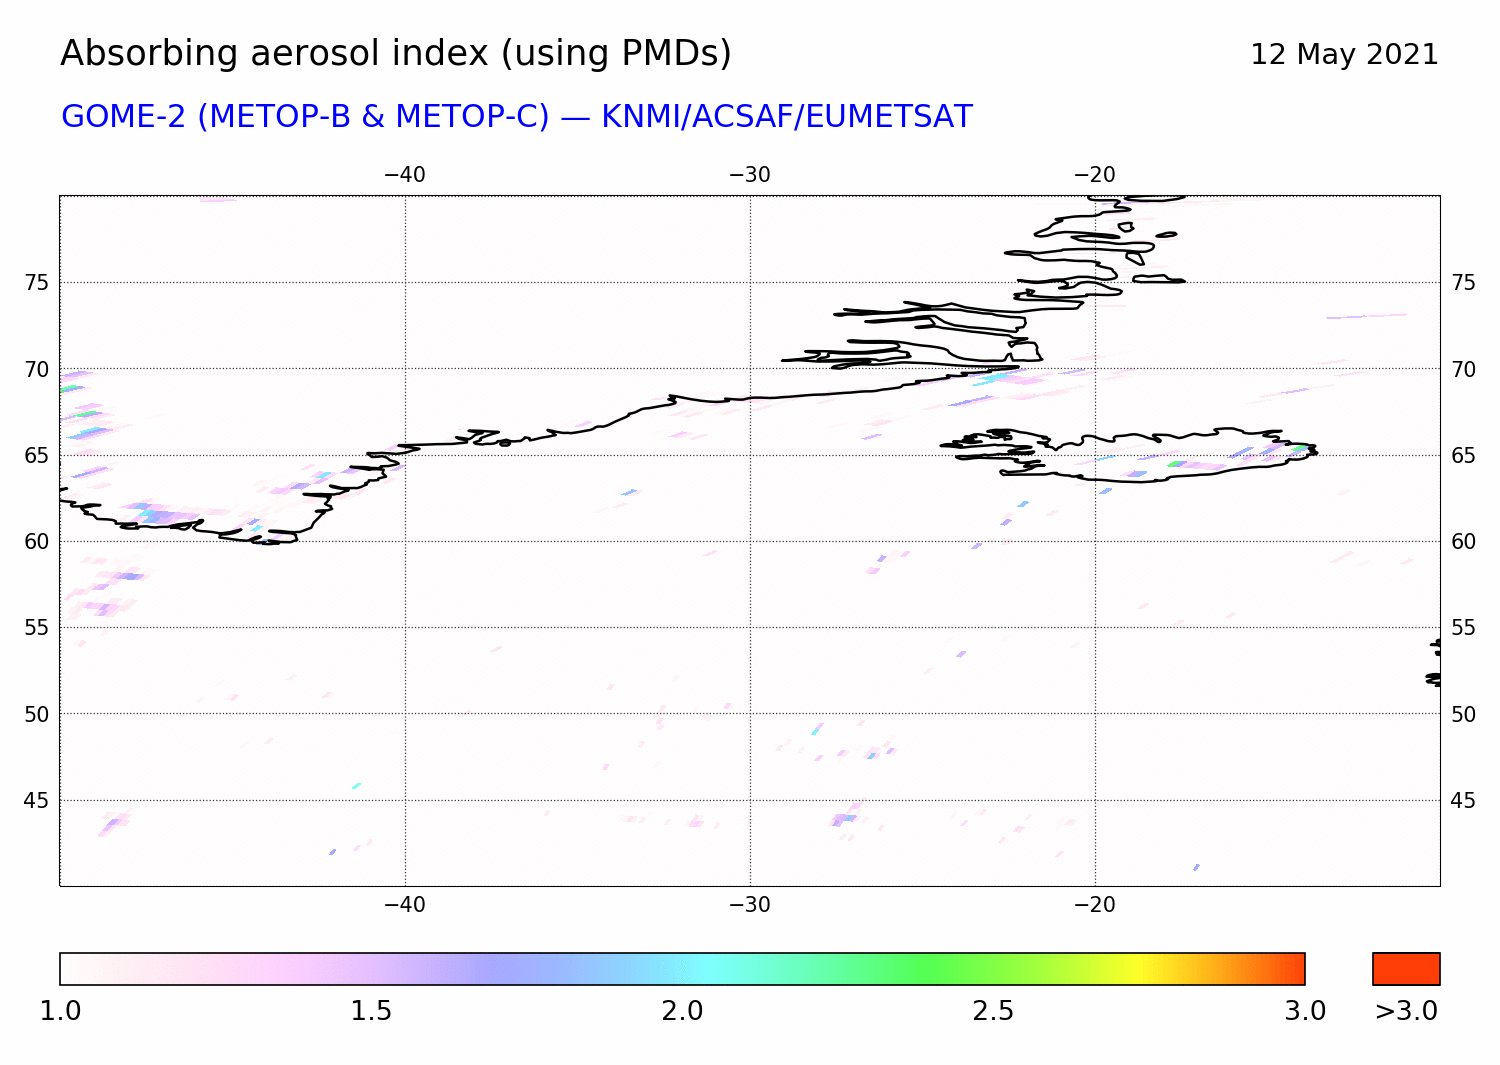 GOME-2 - Absorbing aerosol index of 12 May 2021